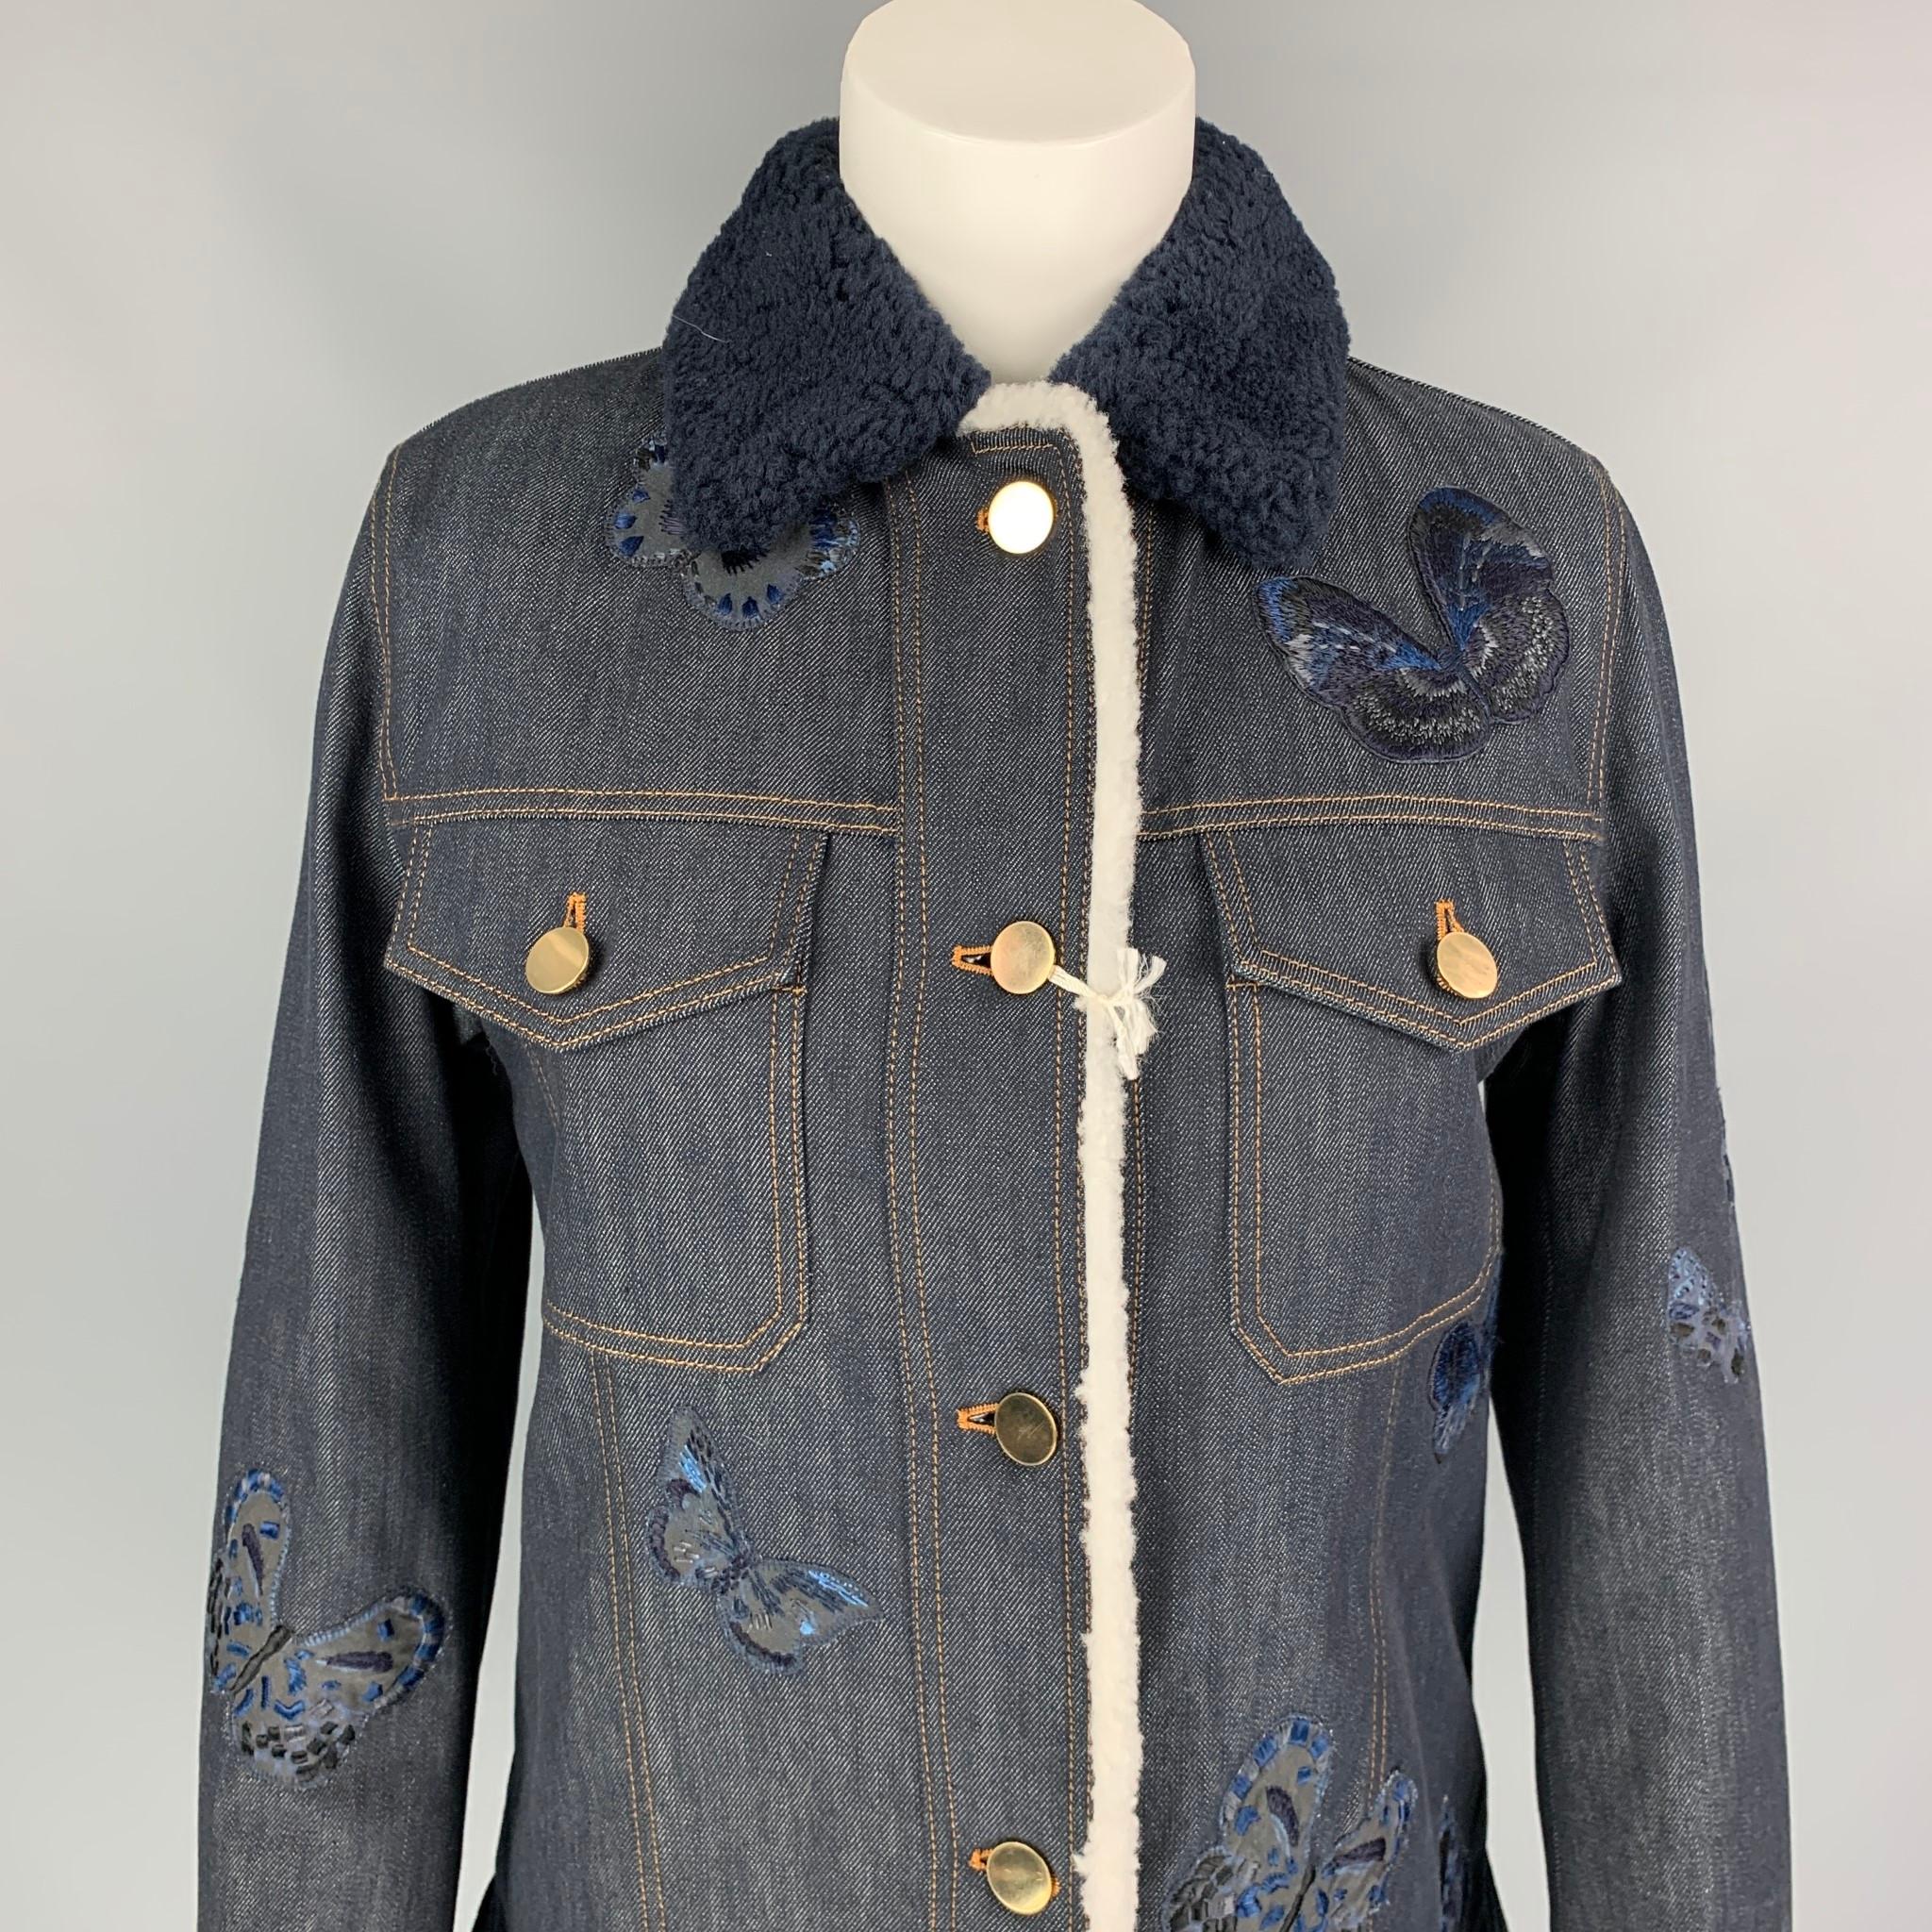 VALENTINO jacket comes in a navy cotton with a embroidered butterfly details featuring a shearling liner, shearling collar, side slits, contrast stitching, gold tone hardware, flap pockets, and a buttoned closure. Made in Italy. 

New With Tags.